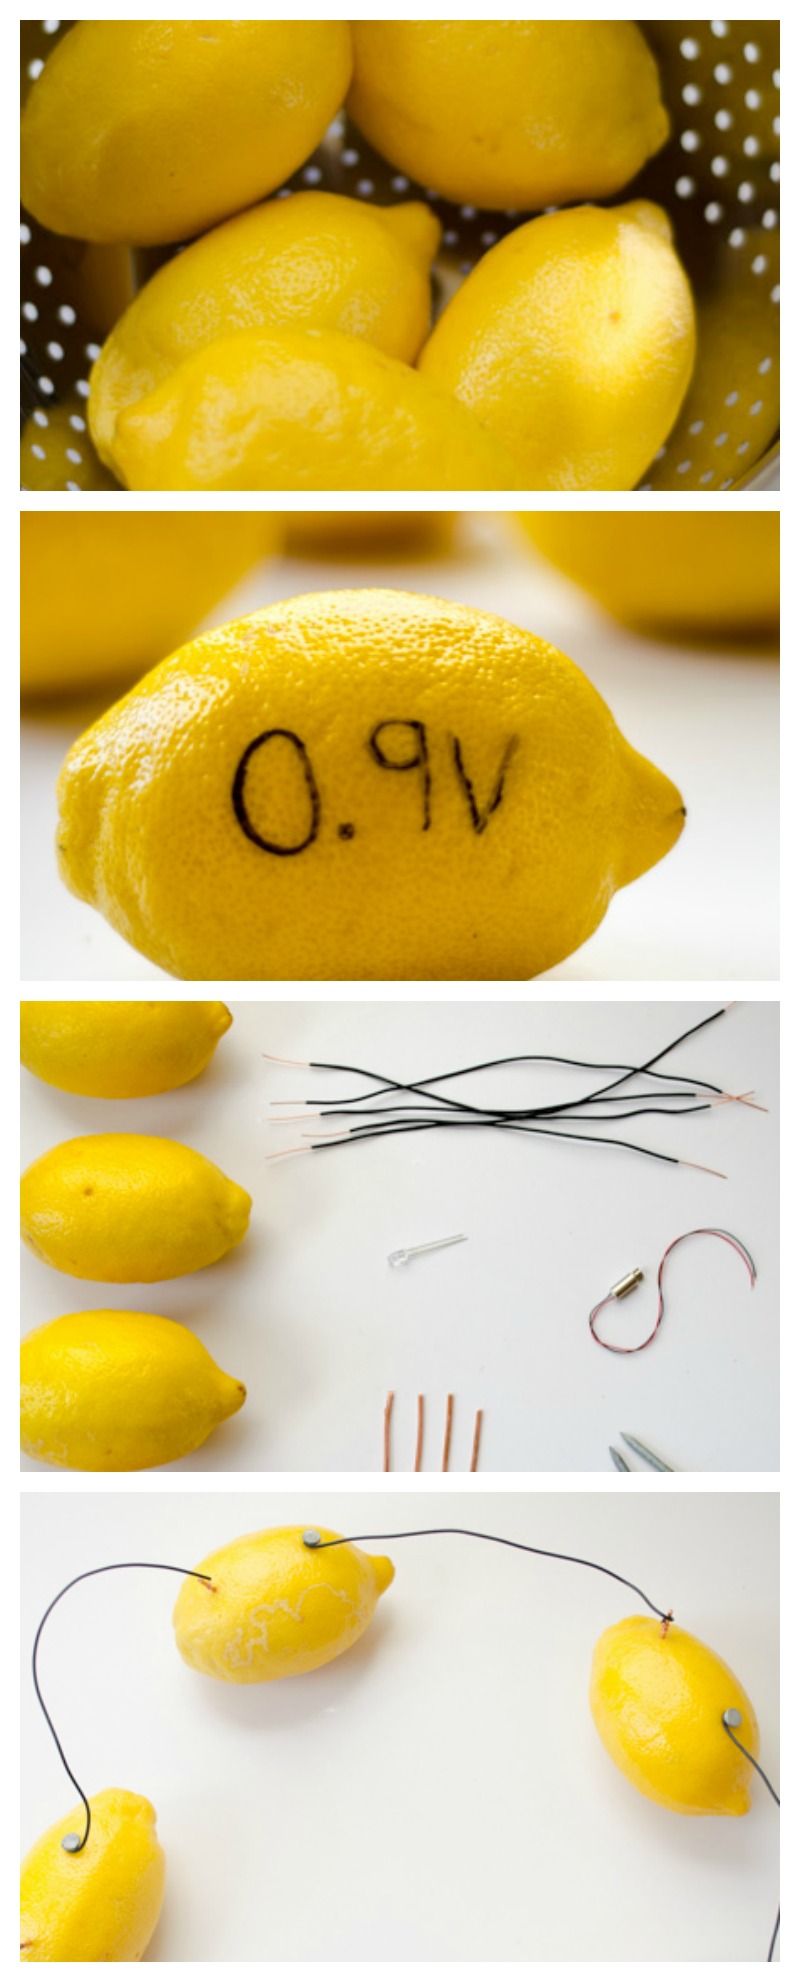 A wonderful preschool science experiment! Get those STEAM gears turning with this lemon-powered battery. #preschool #prek #STEM #STEAM #preschoolscience #scienceprojects